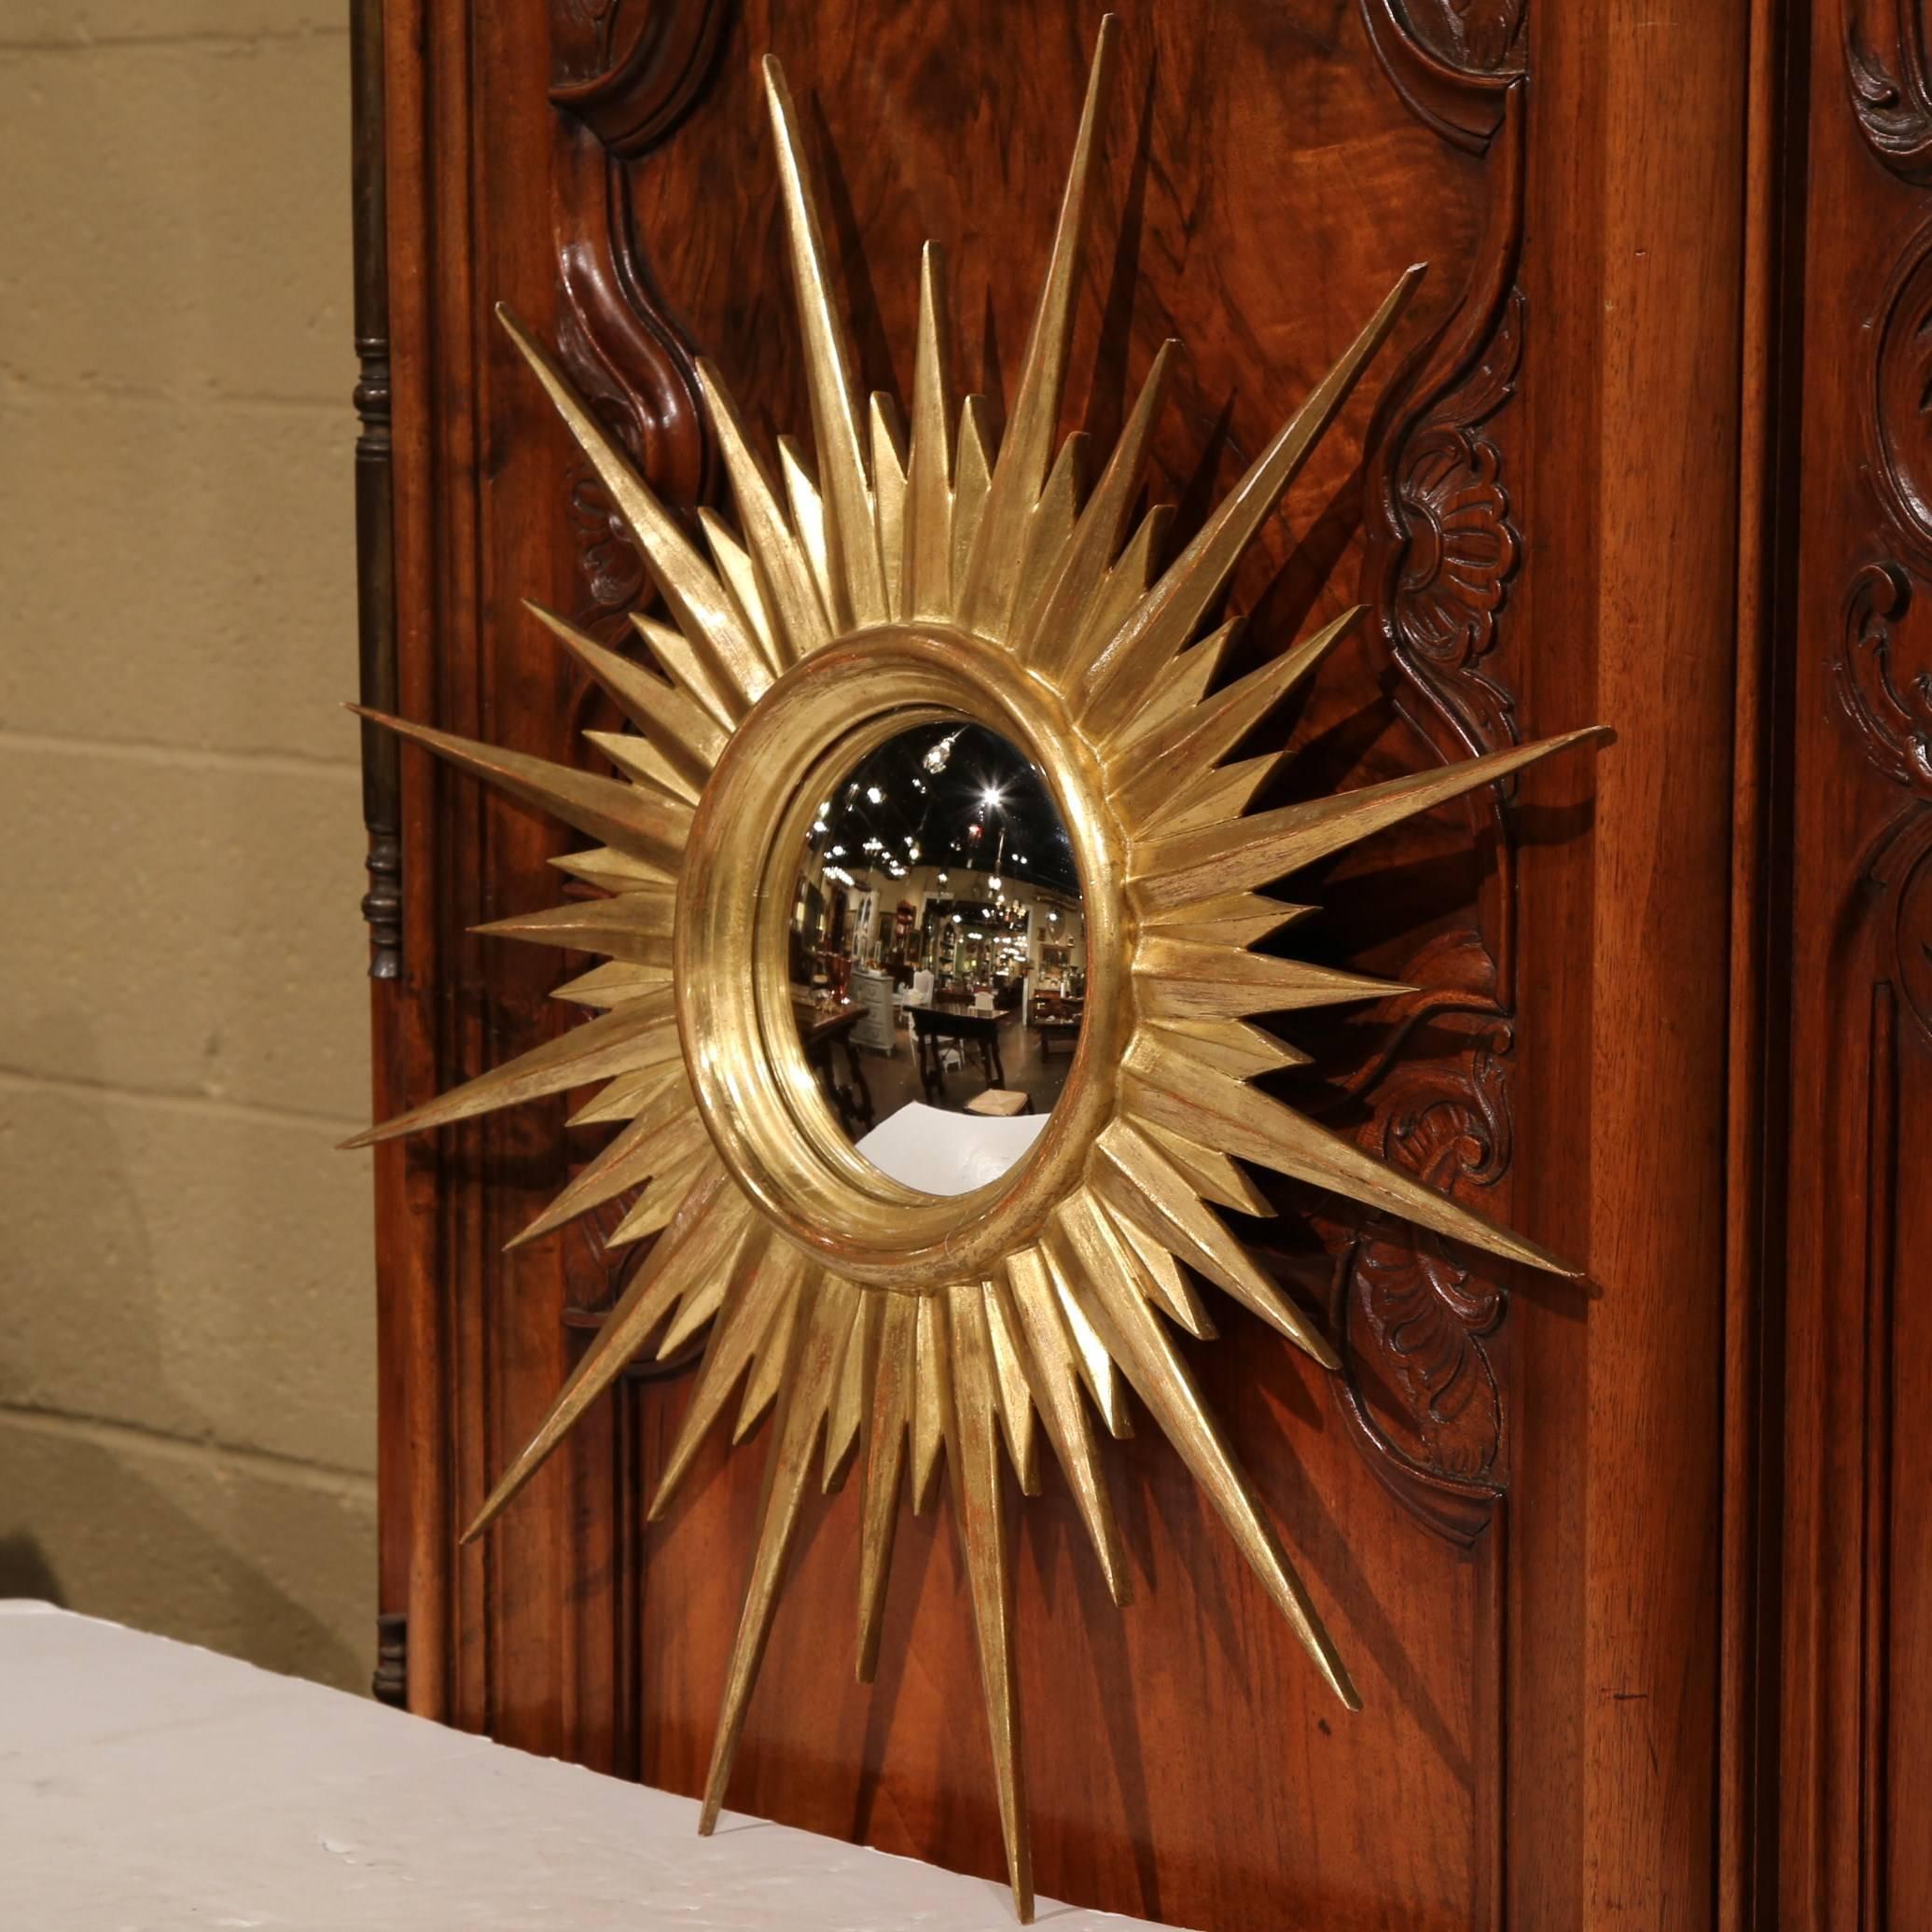 Whether you live in a contemporary or traditional home, this beautifully gilded sun mirror from France, circa 1960, is a must-have. This mirror has a perfectly convex glass, making it an ideal decorative piece for any room in the house. The rays